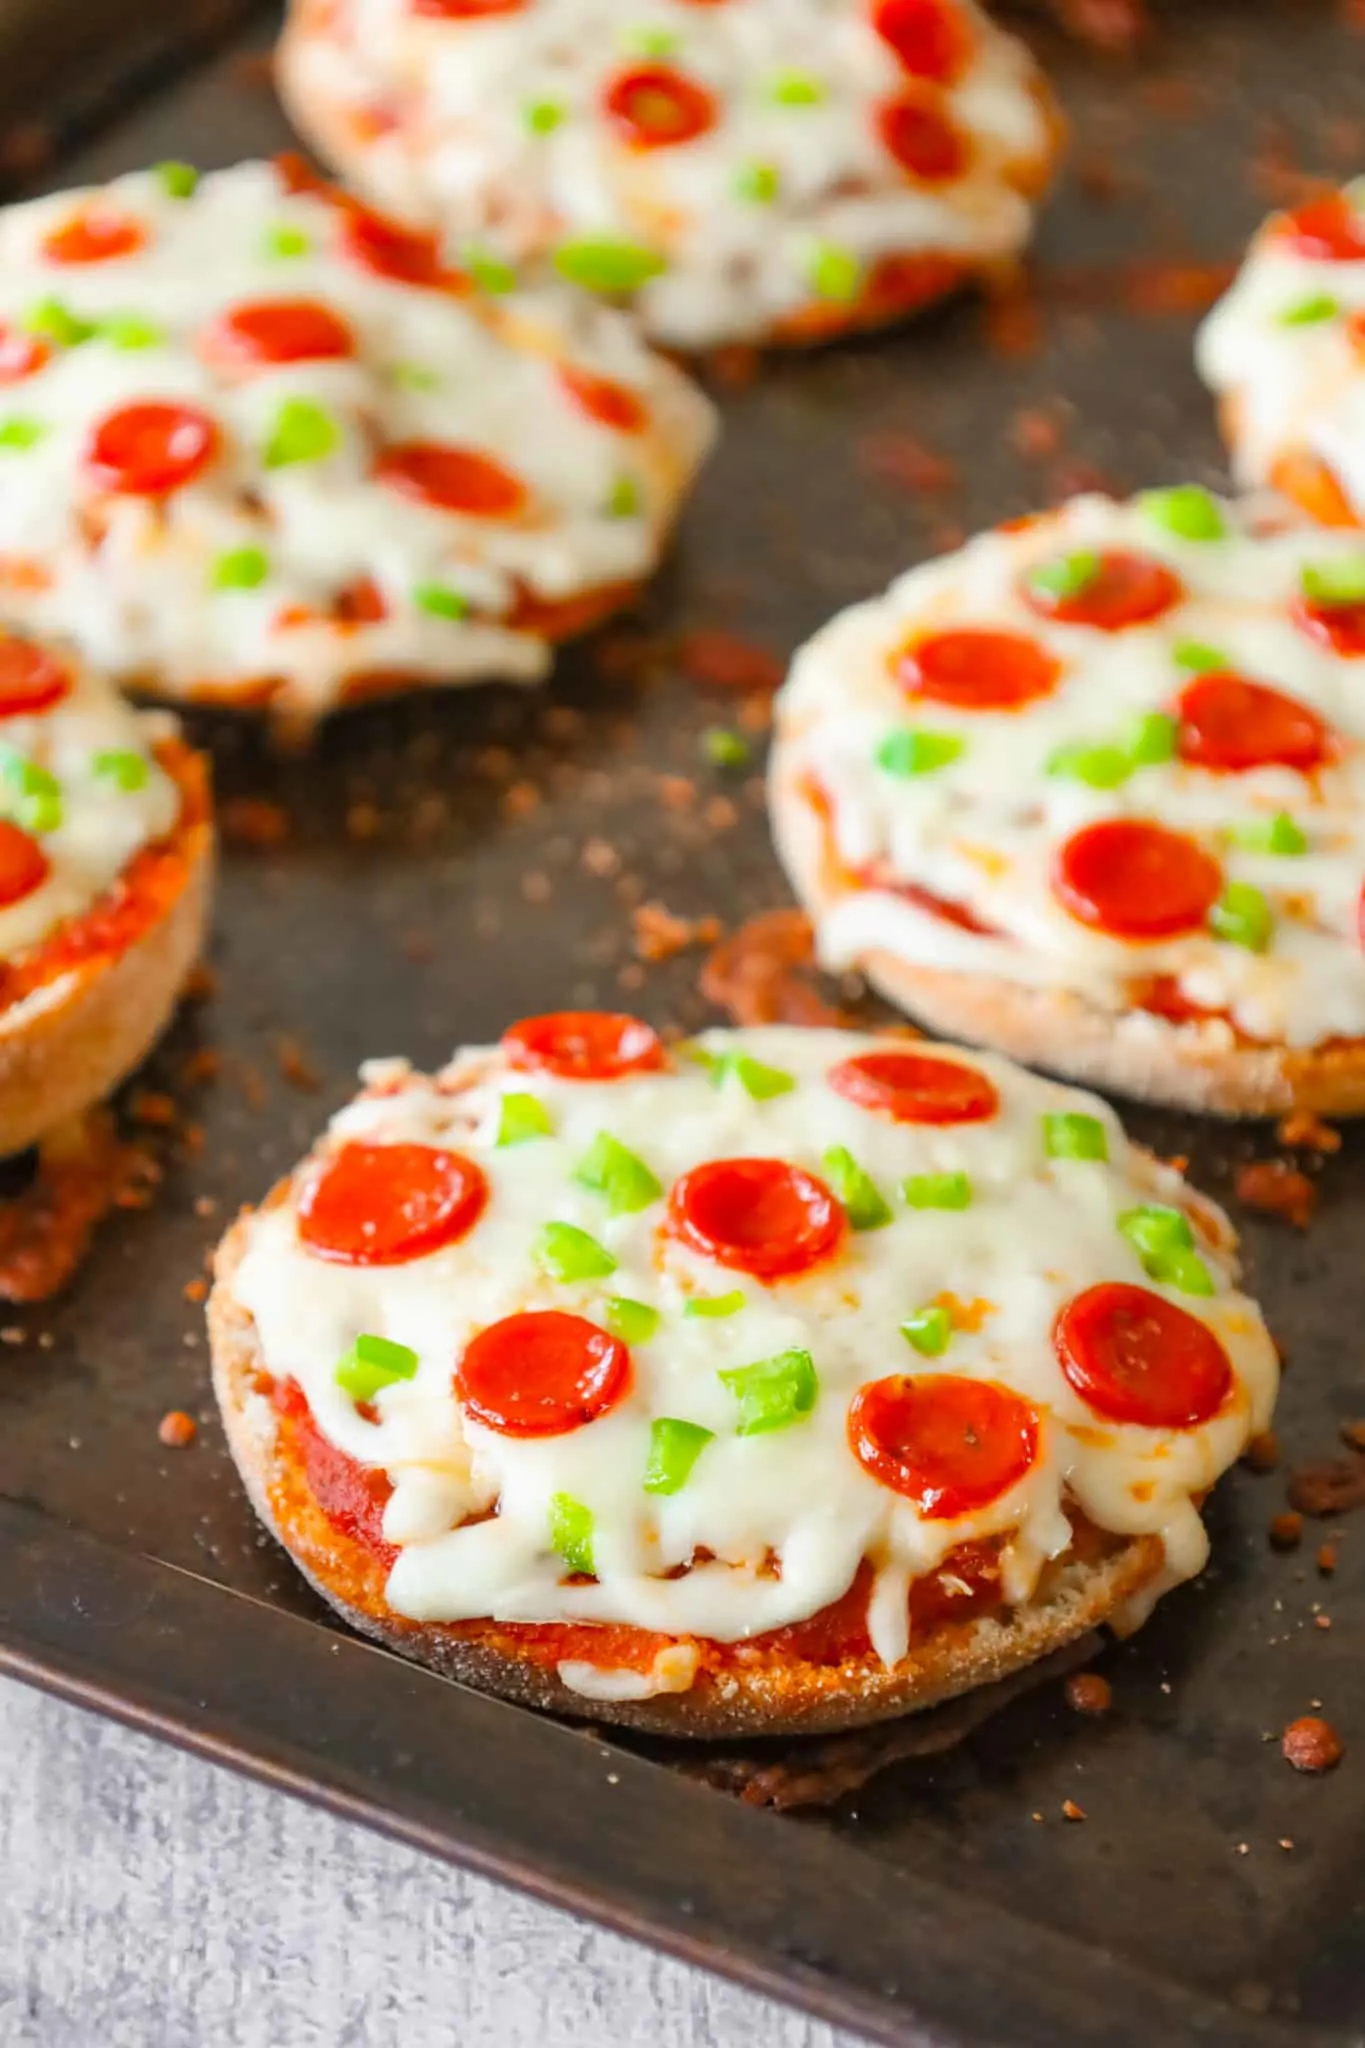 English Muffin Pizzas are an easy dinner recipe made with split English muffins topped with pizza sauce, shredded mozzarella cheese, mini pepperonis and diced green peppers.